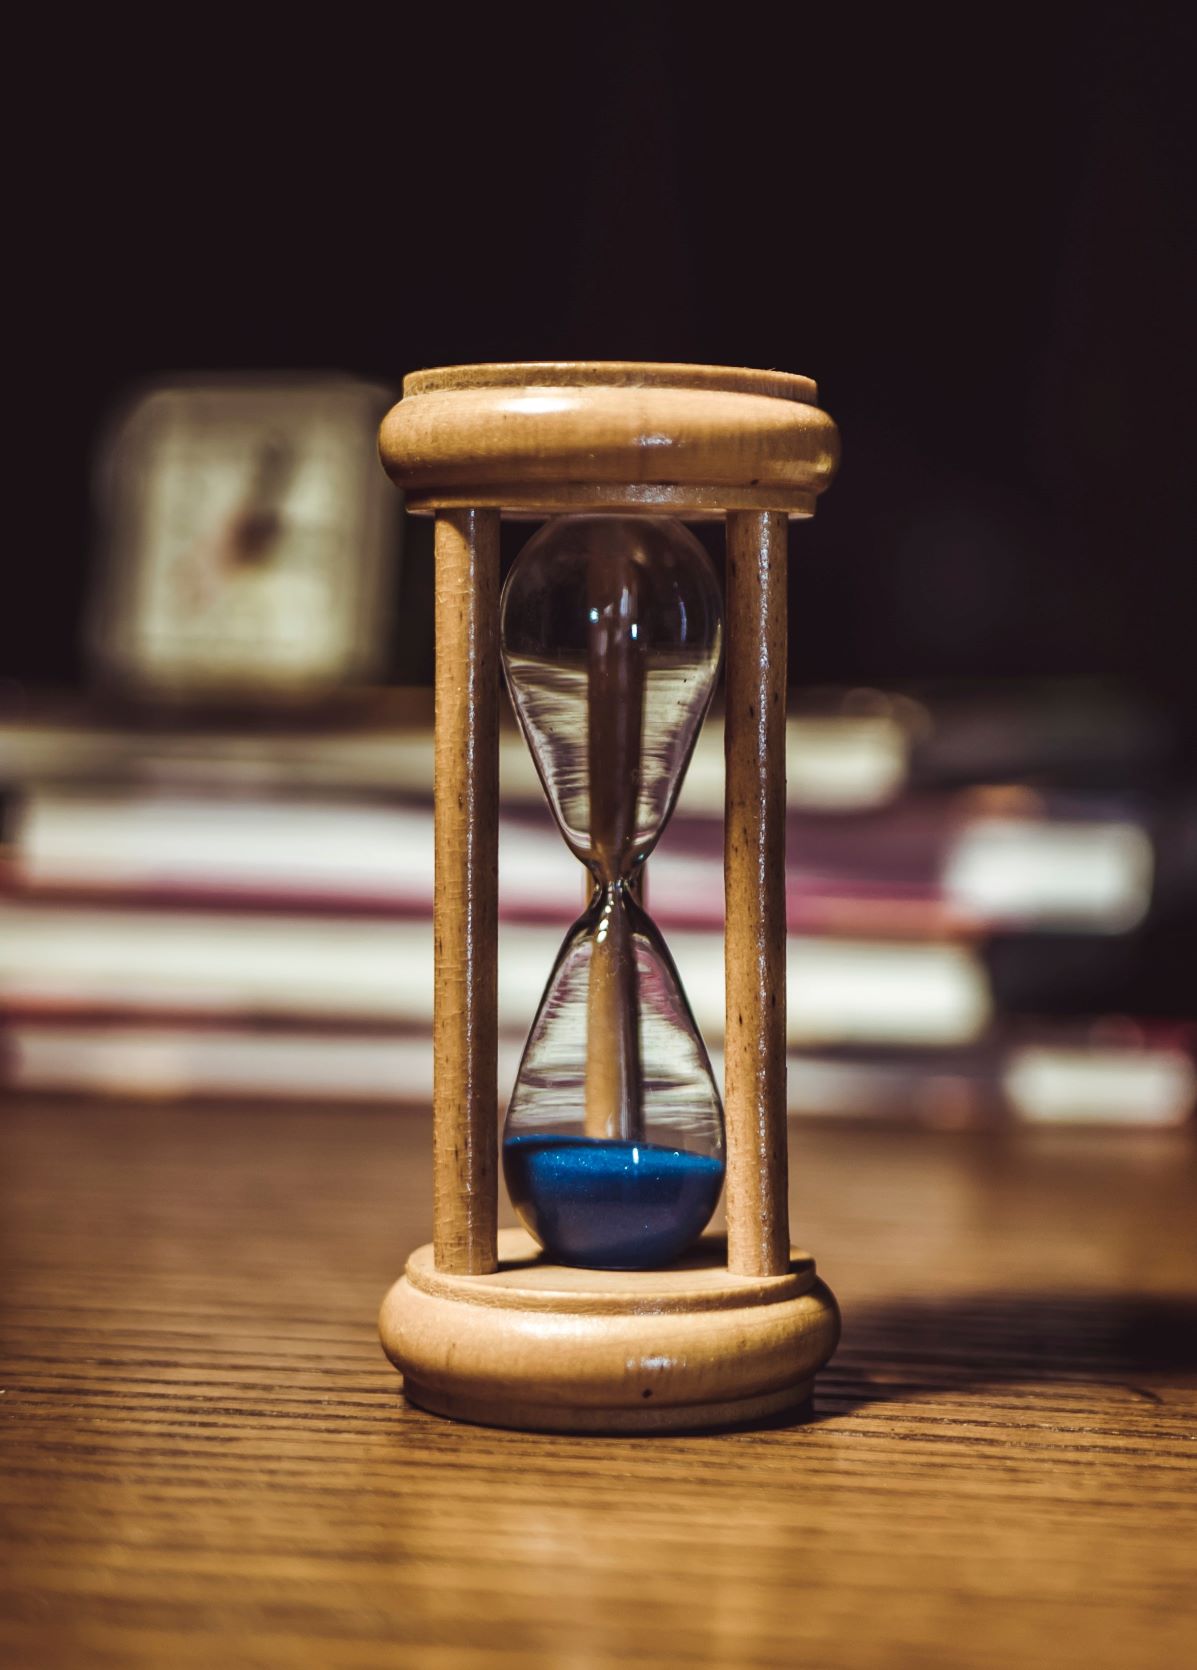 An hourglass with books and a clock in the background